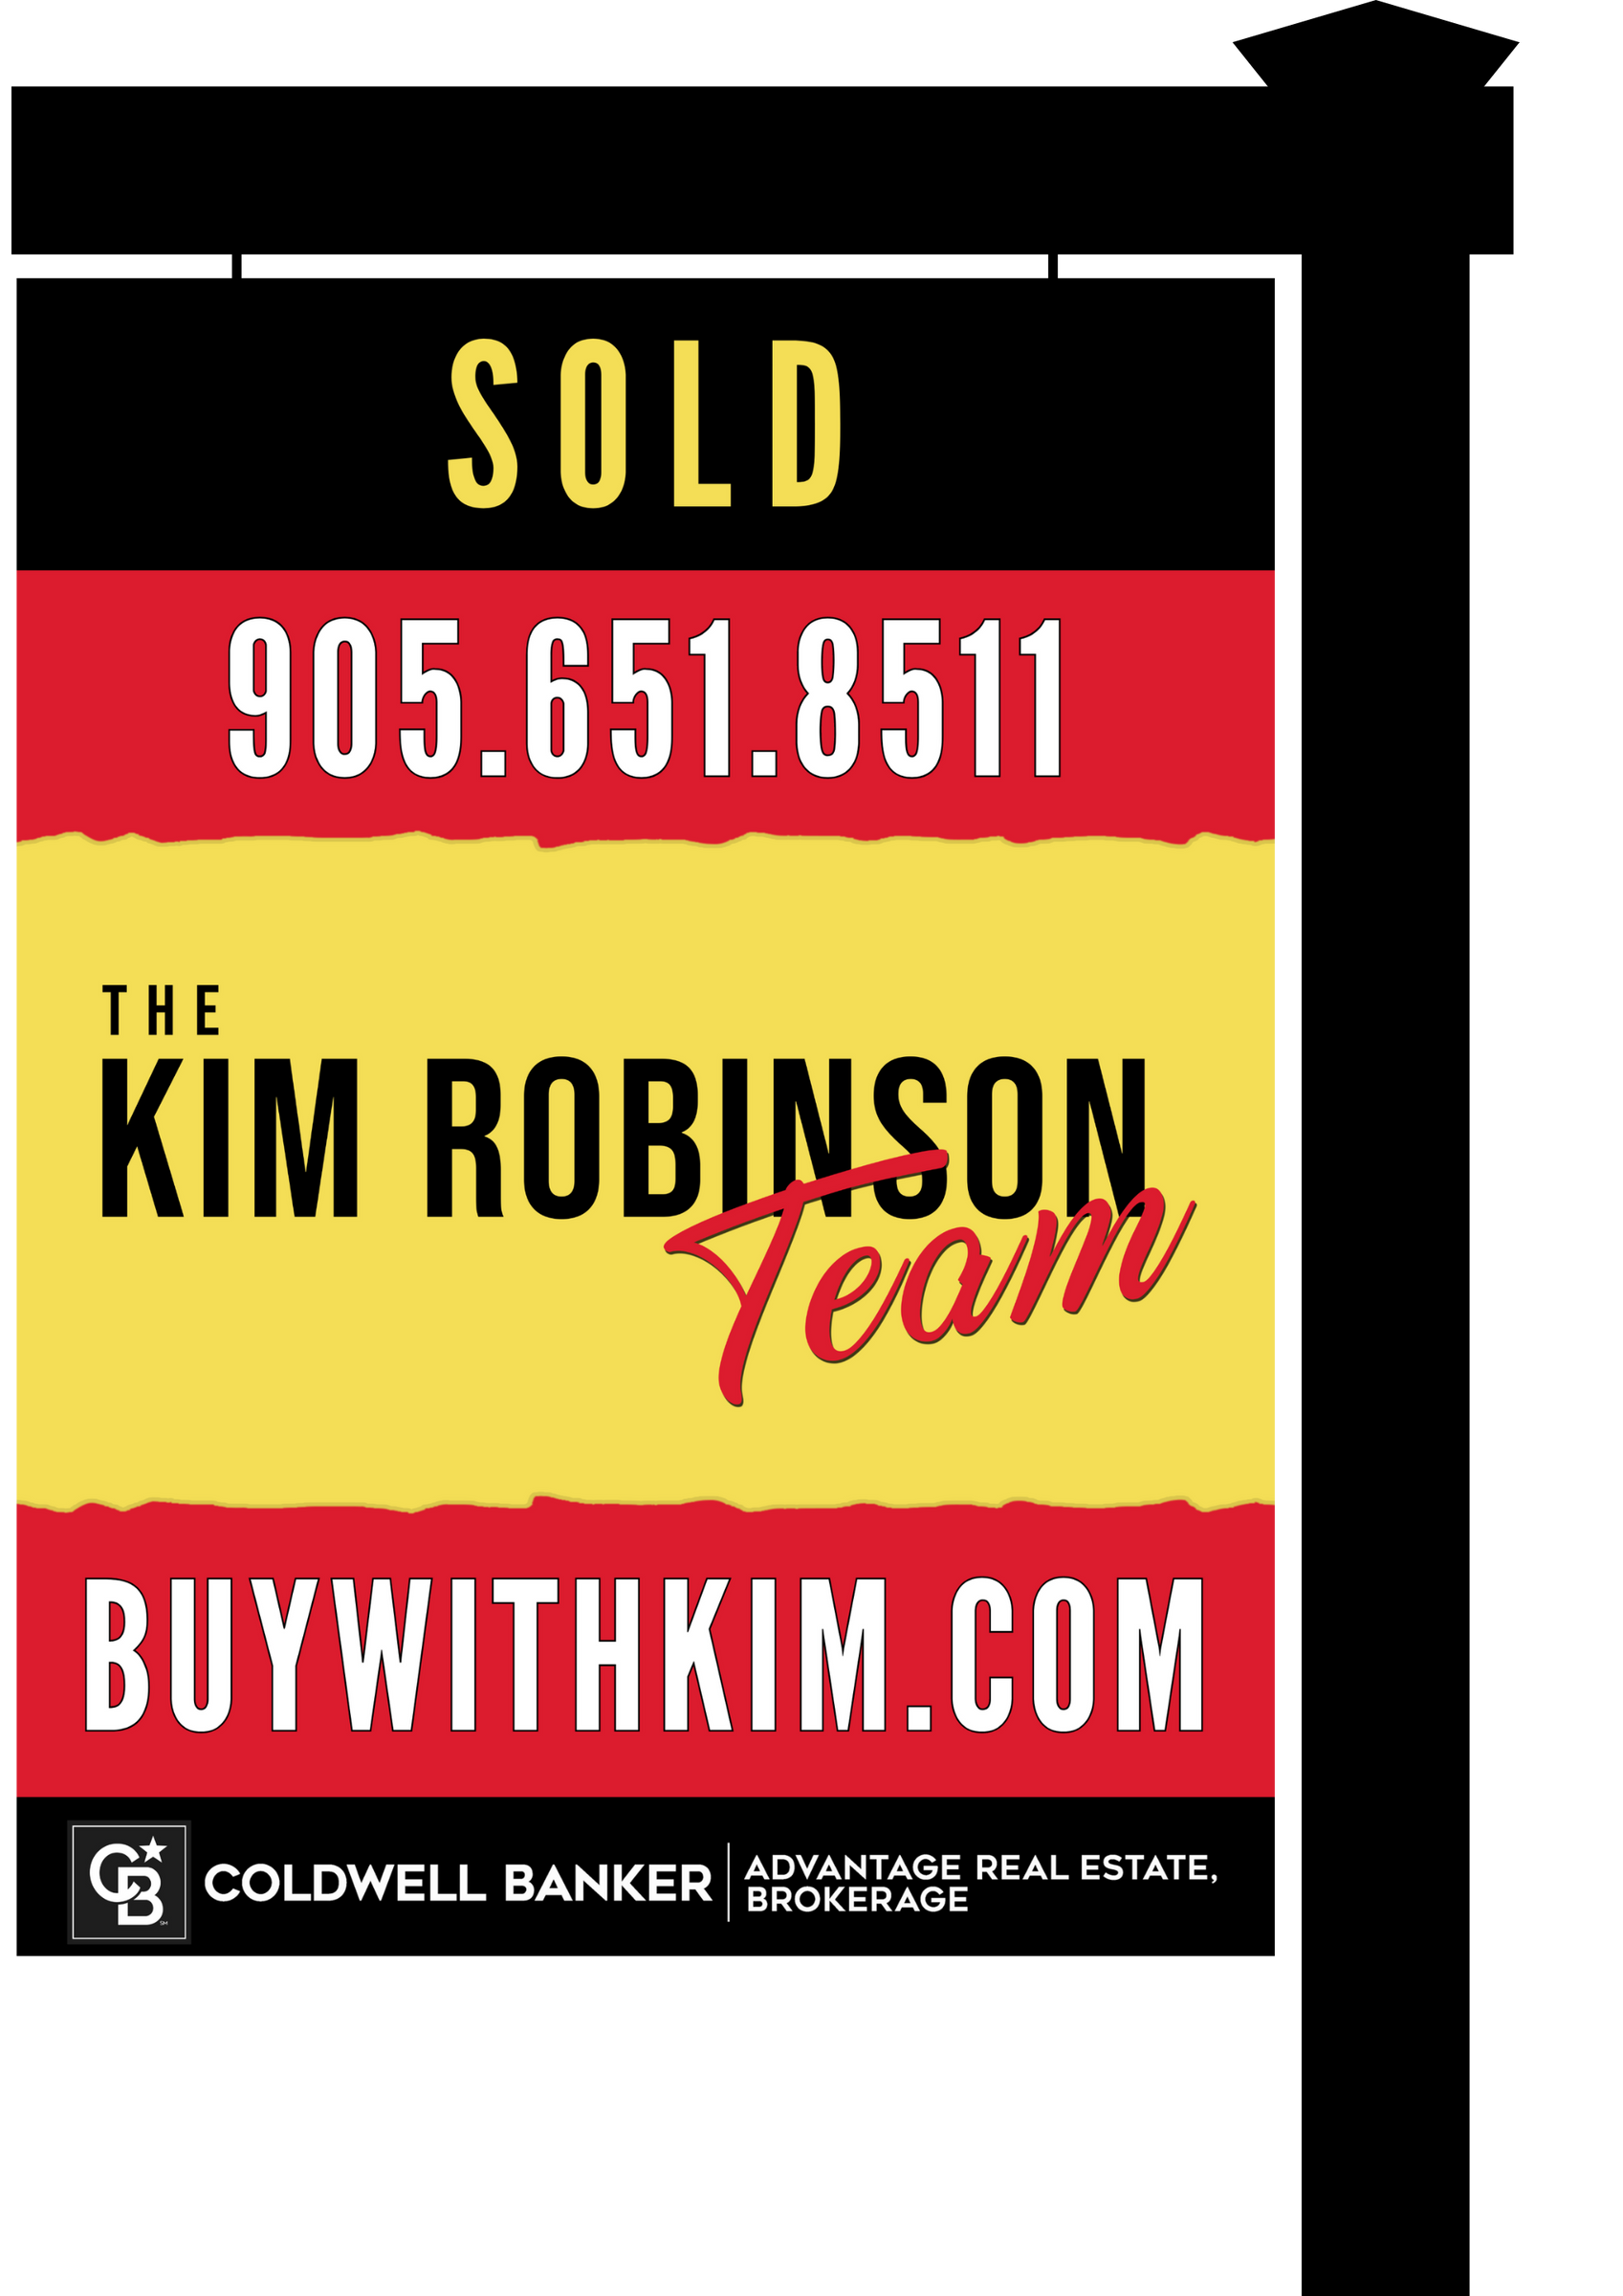 A prominently displayed red and yellow real estate sign from The Kim Robinson Team, standing tall with 'SOLD' proudly marked, showcasing their exceptional visibility and successful property listings. The sign features all contact details for the team, offering a direct link to their services and expertise.